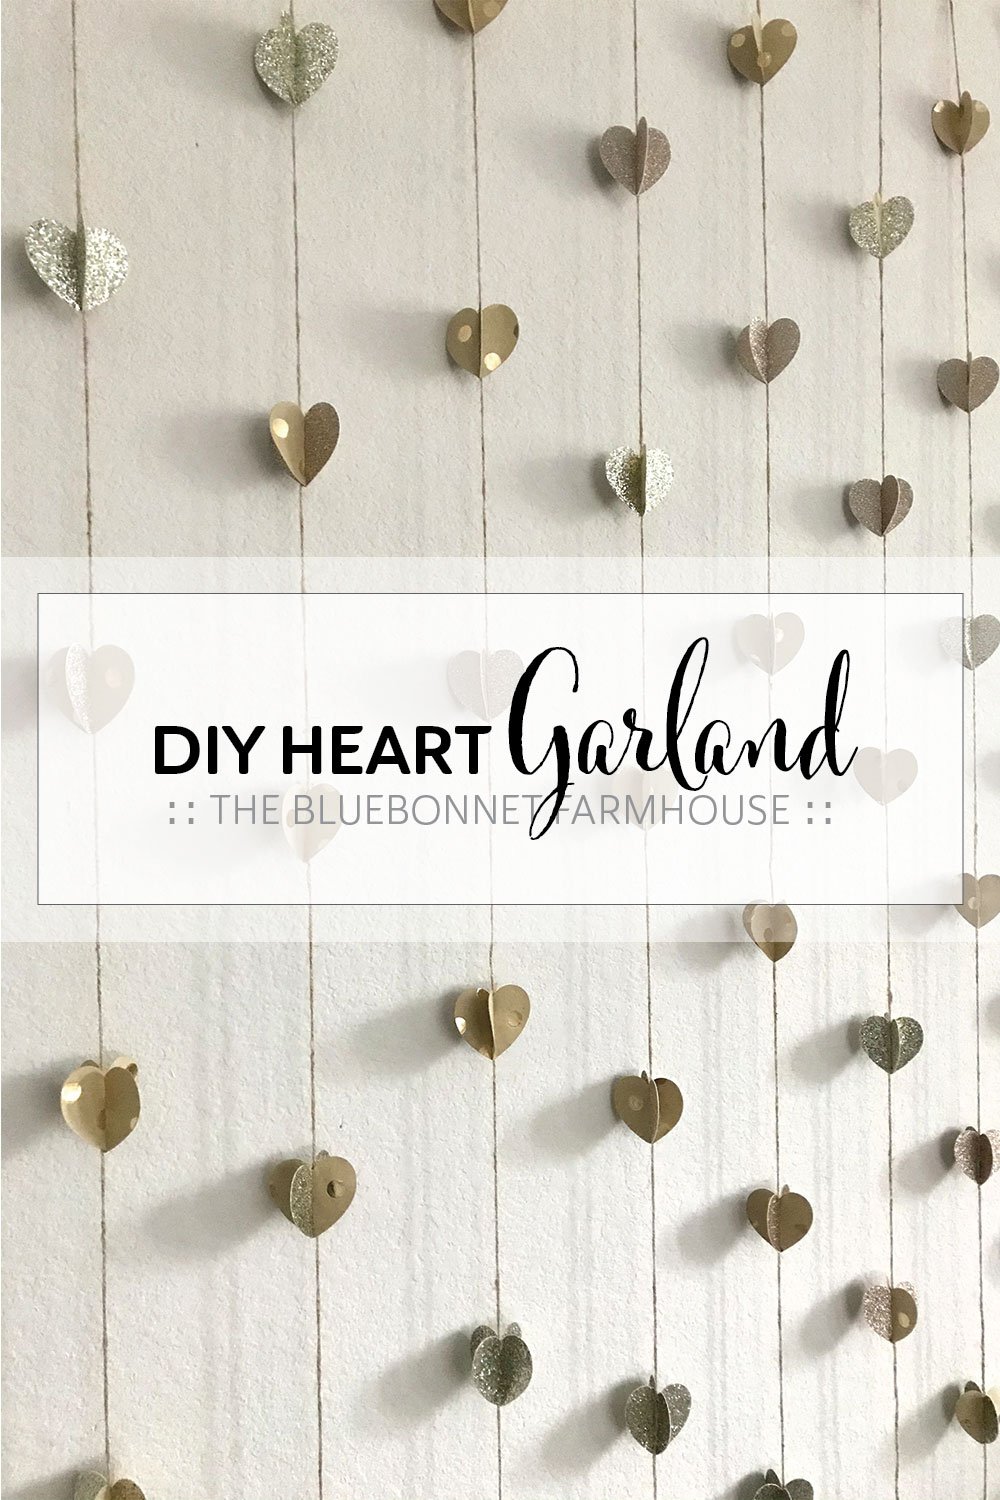 diy heart garland made of glitter paper, neutral tone paper, and twine